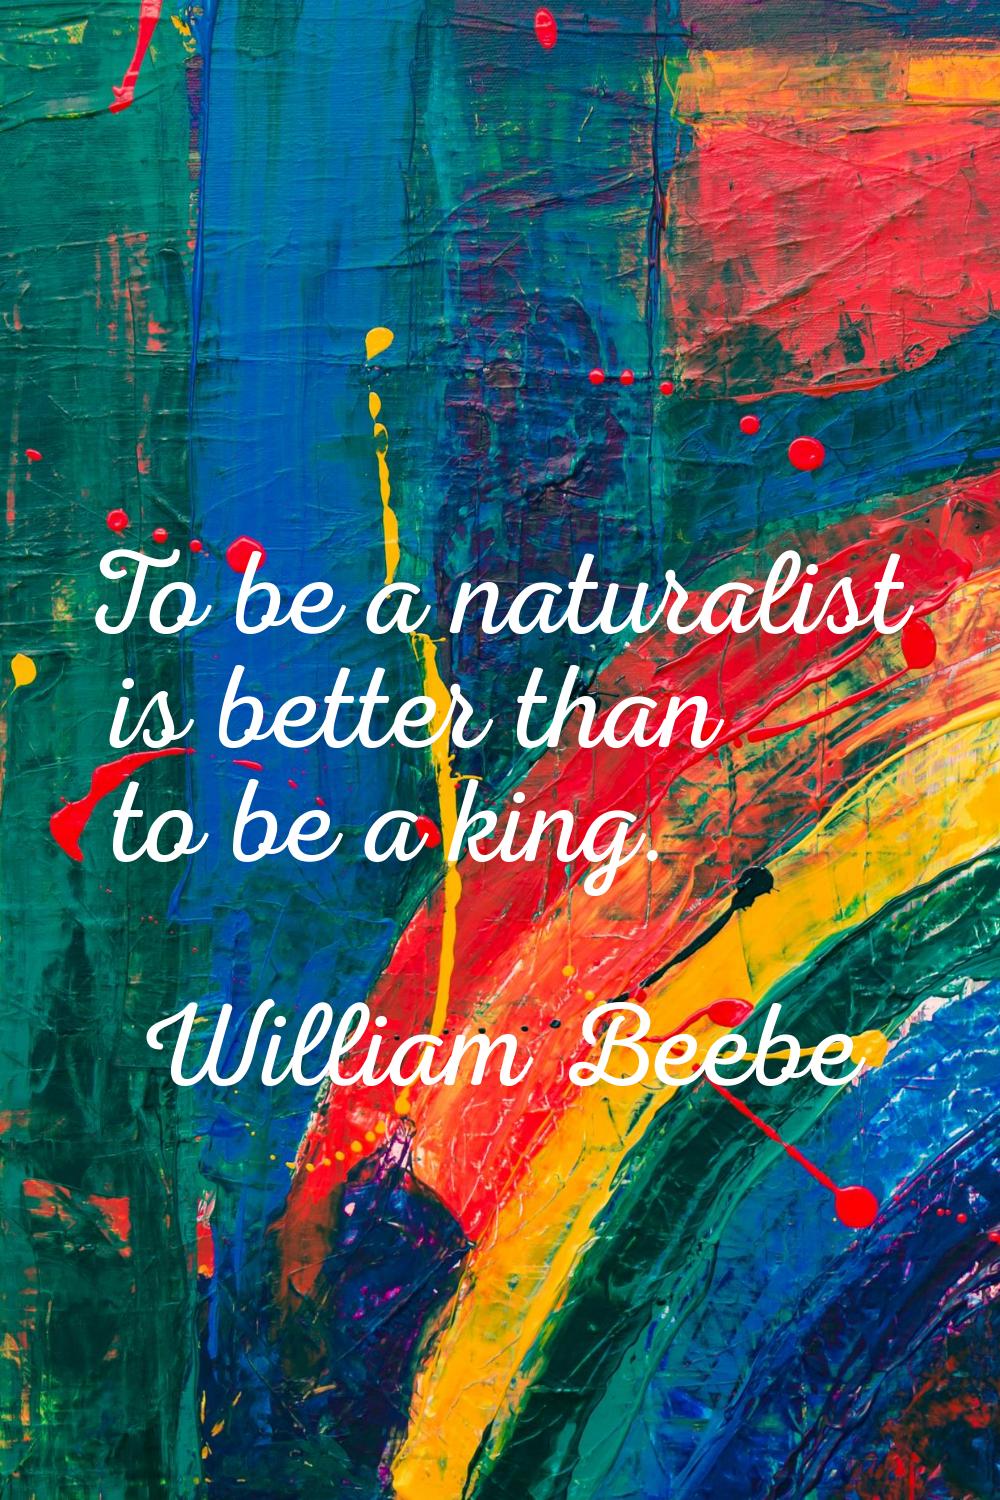 To be a naturalist is better than to be a king.